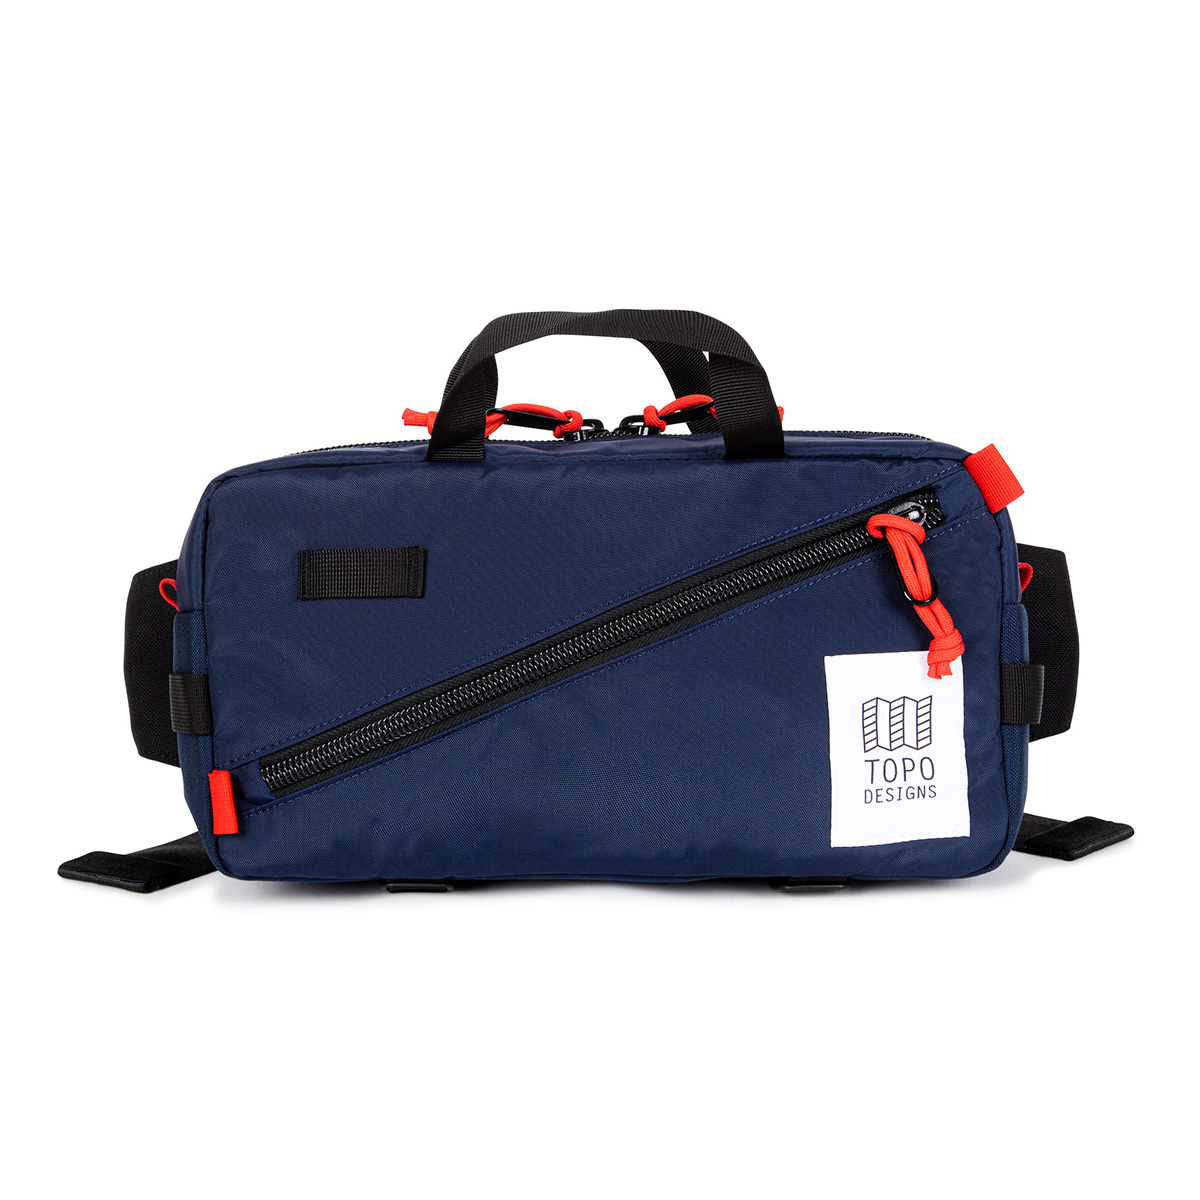 Topo Designs Quick Pack Navy, can be slung over your shoulder or worn around your waist, fanny pack style